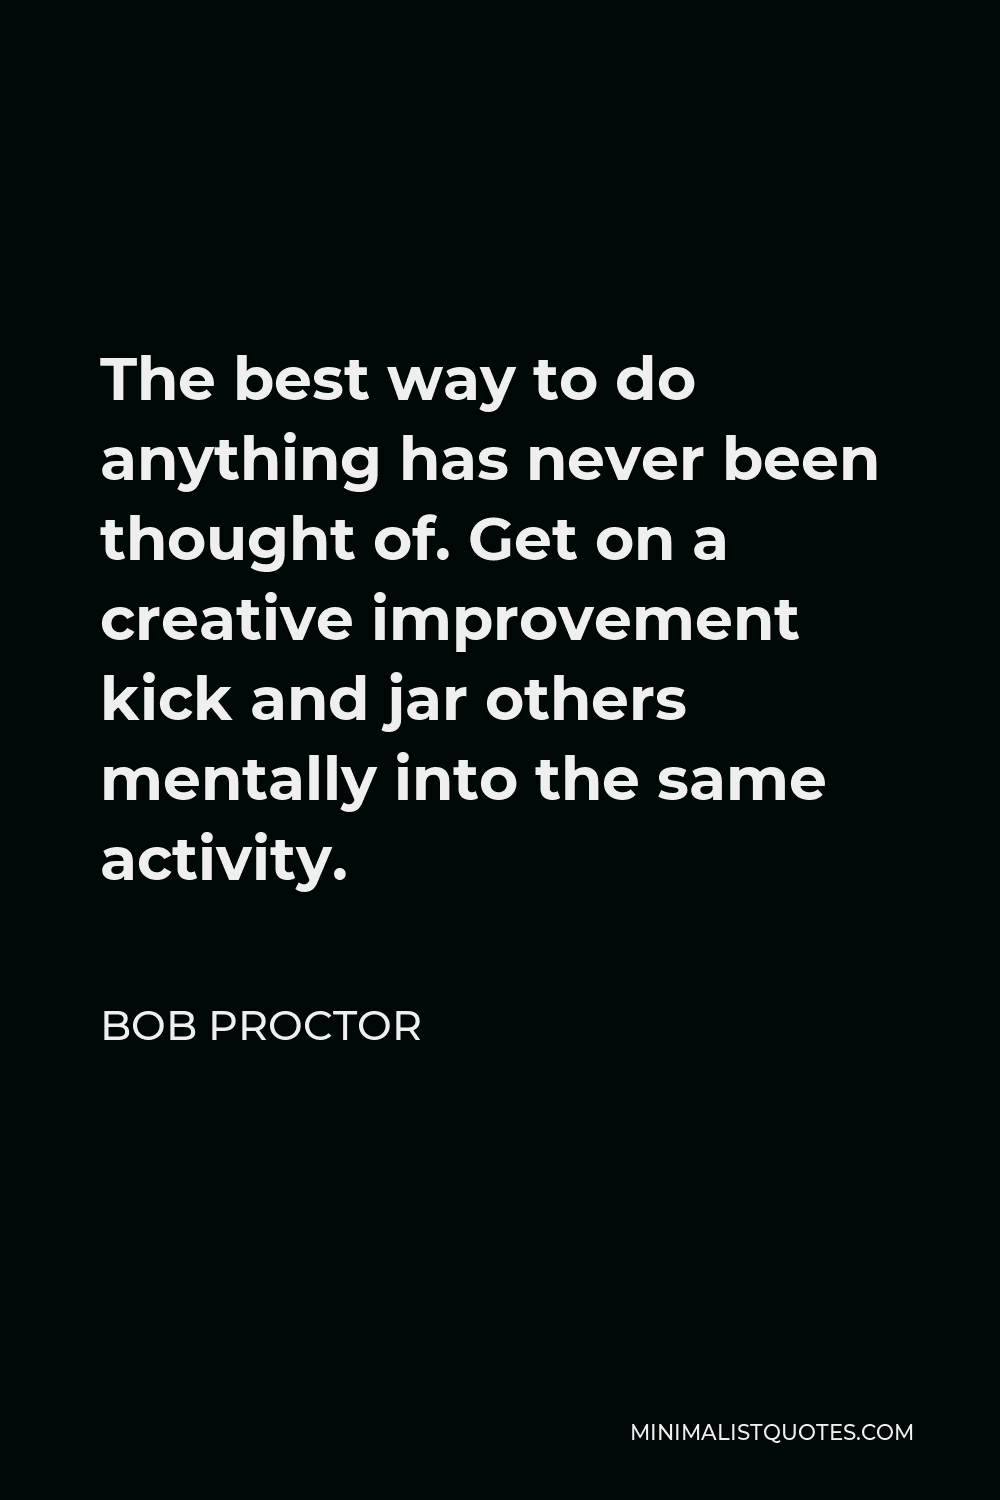 Bob Proctor Quote - The best way to do anything has never been thought of. Get on a creative improvement kick and jar others mentally into the same activity.